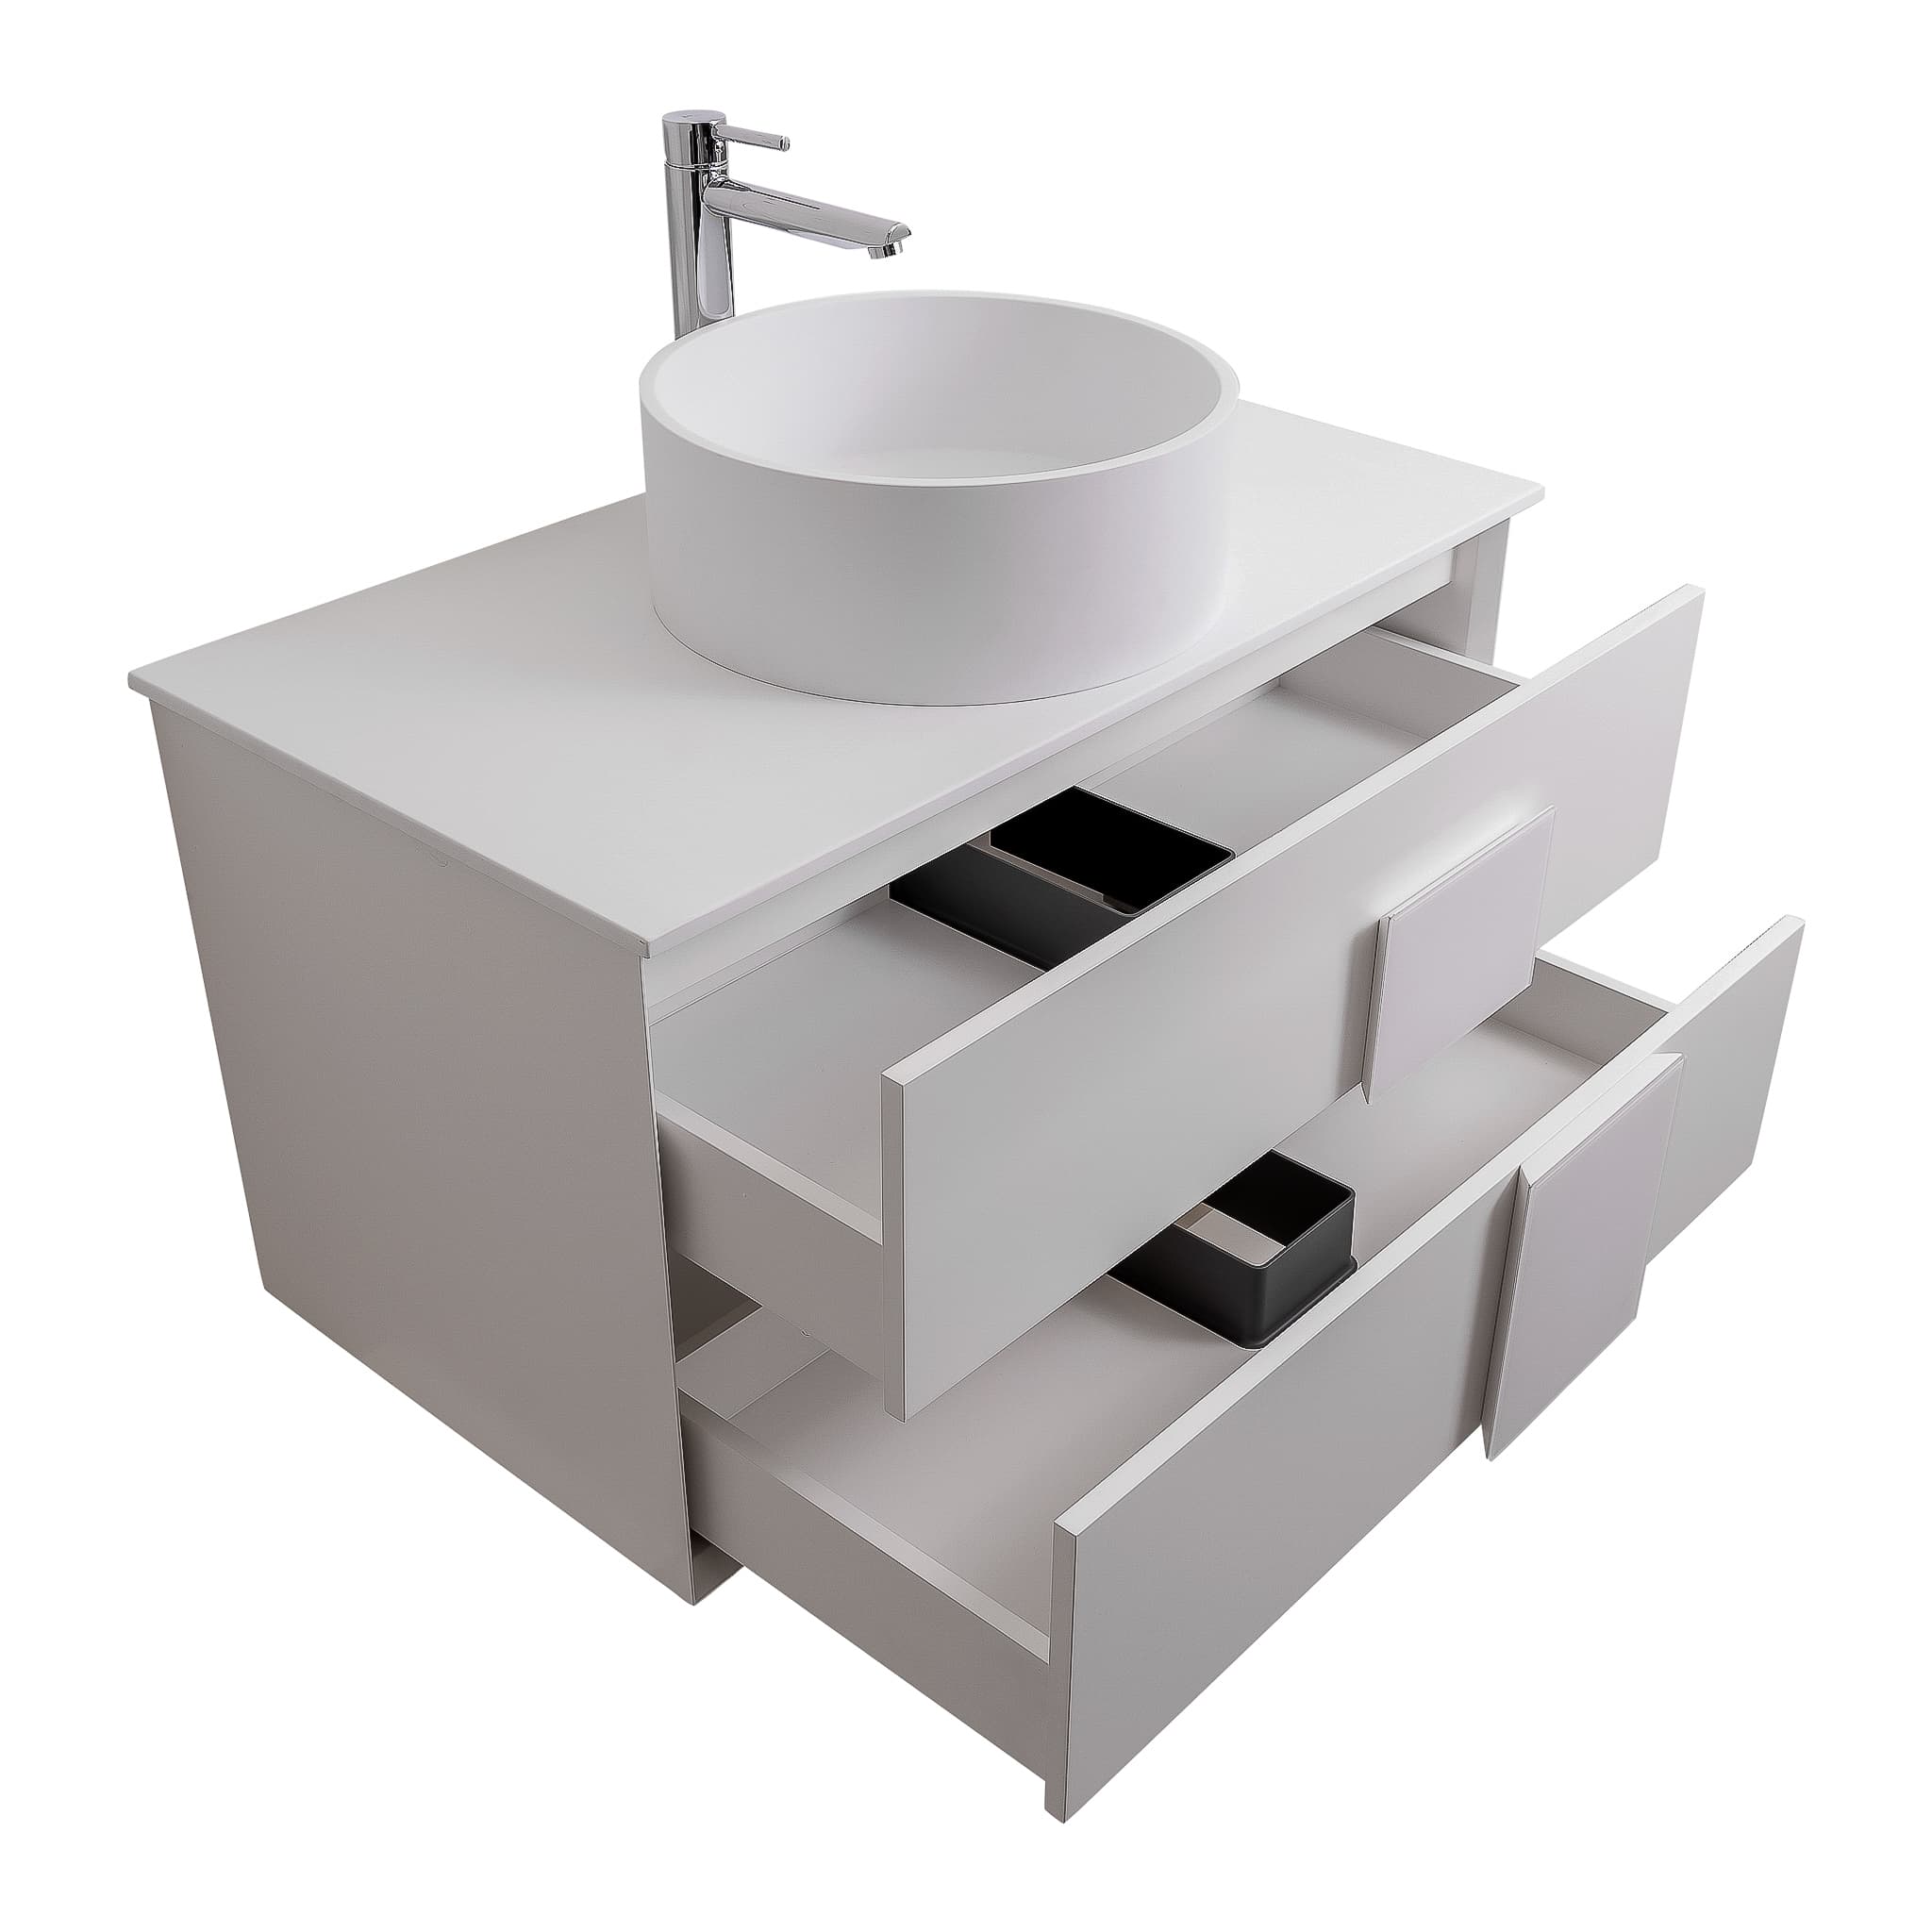 Piazza 31.5 Matte White With White Handle Cabinet, Solid Surface Flat White Counter and Round Solid Surface White Basin 1386, Wall Mounted Modern Vanity Set